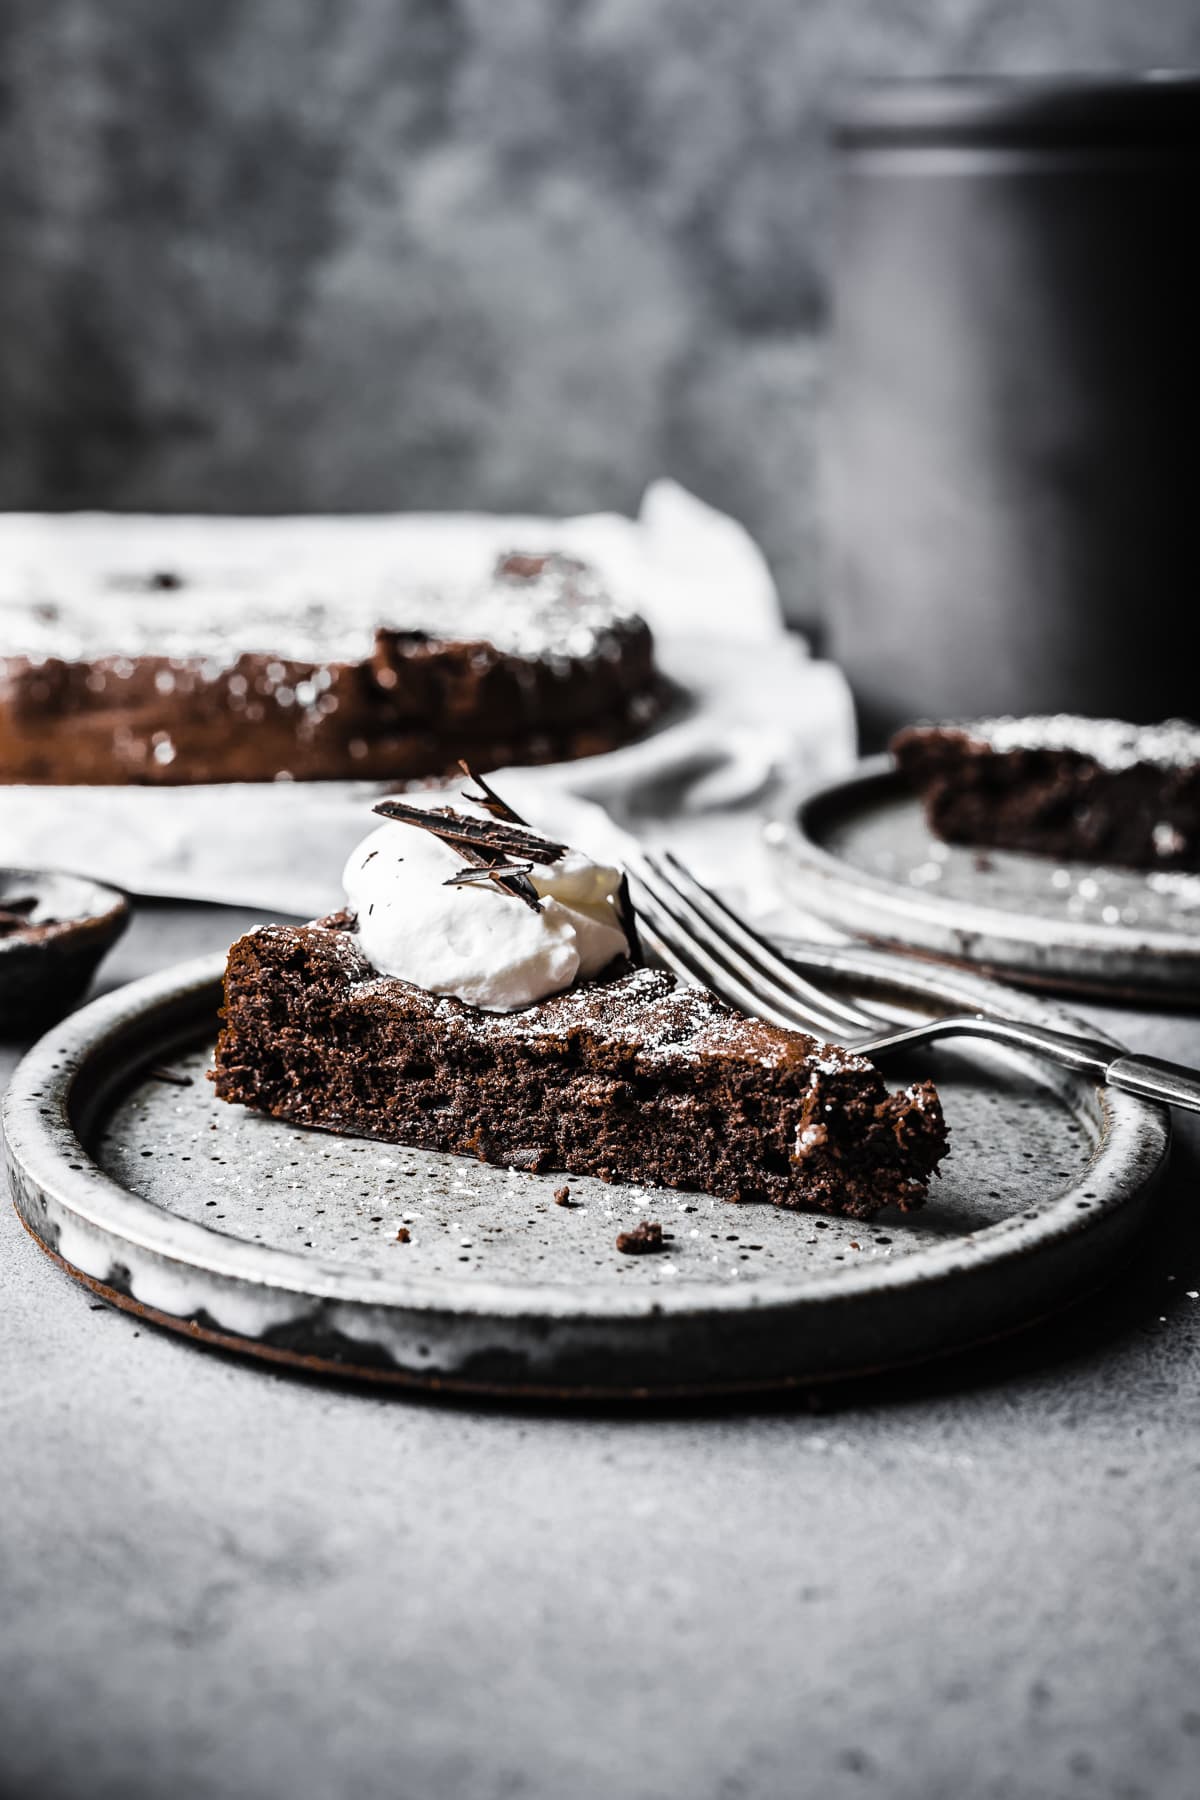 A slice of flourless chocolate cake with whipped cream and chocolate shavings on a ceramic plate, viewed from the side to show the cake's crumb. The remainder of the cake is out of focus in the background.